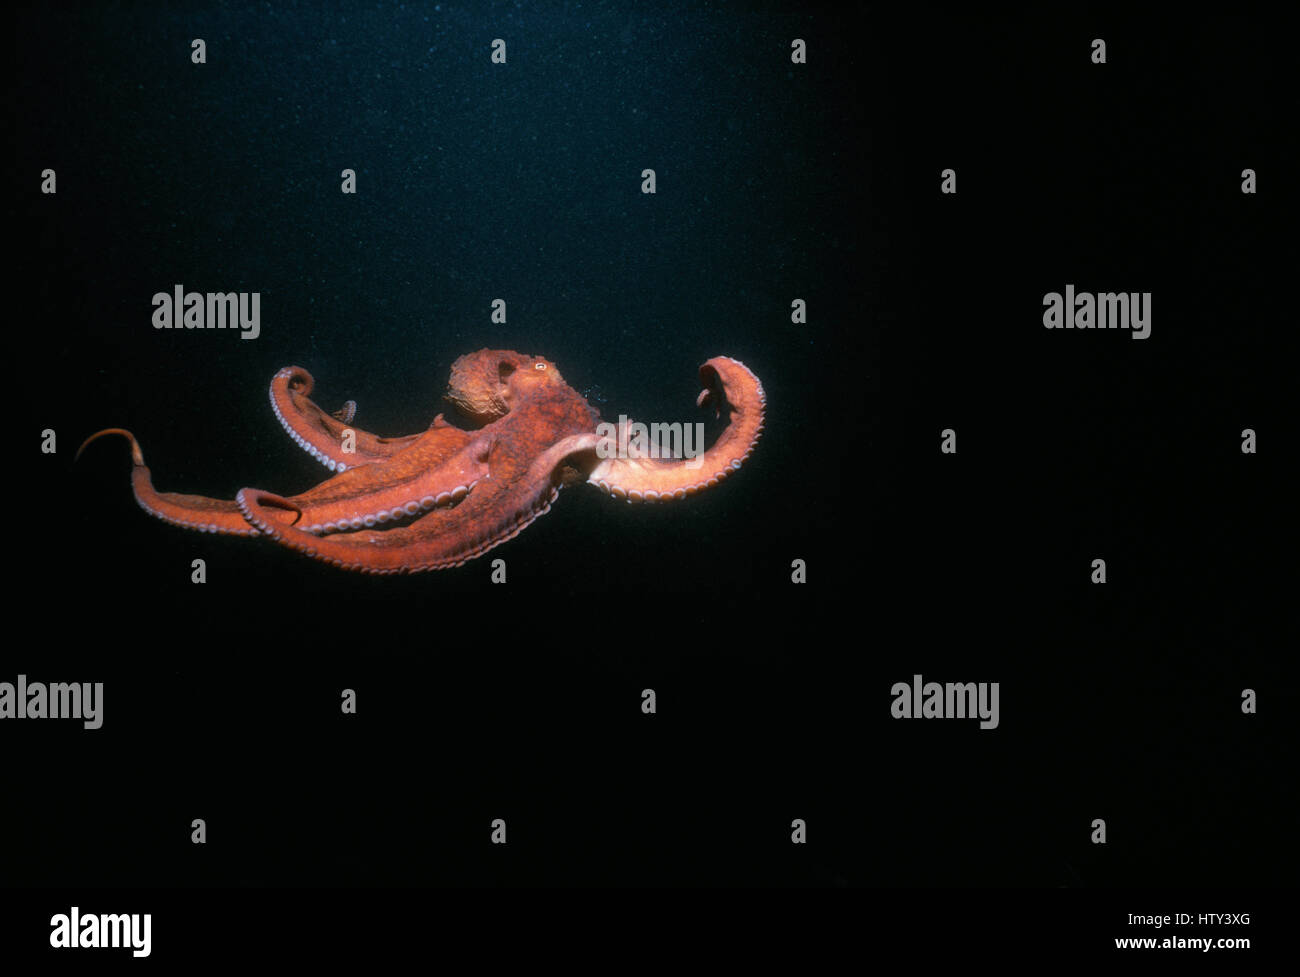 A Giant Pacific Octopus (Enteroctopus dofleini) weighing over 20 Kilos. Victoria Island, British Columbia - North Pacific Ocean. Digitally manipulated Stock Photo